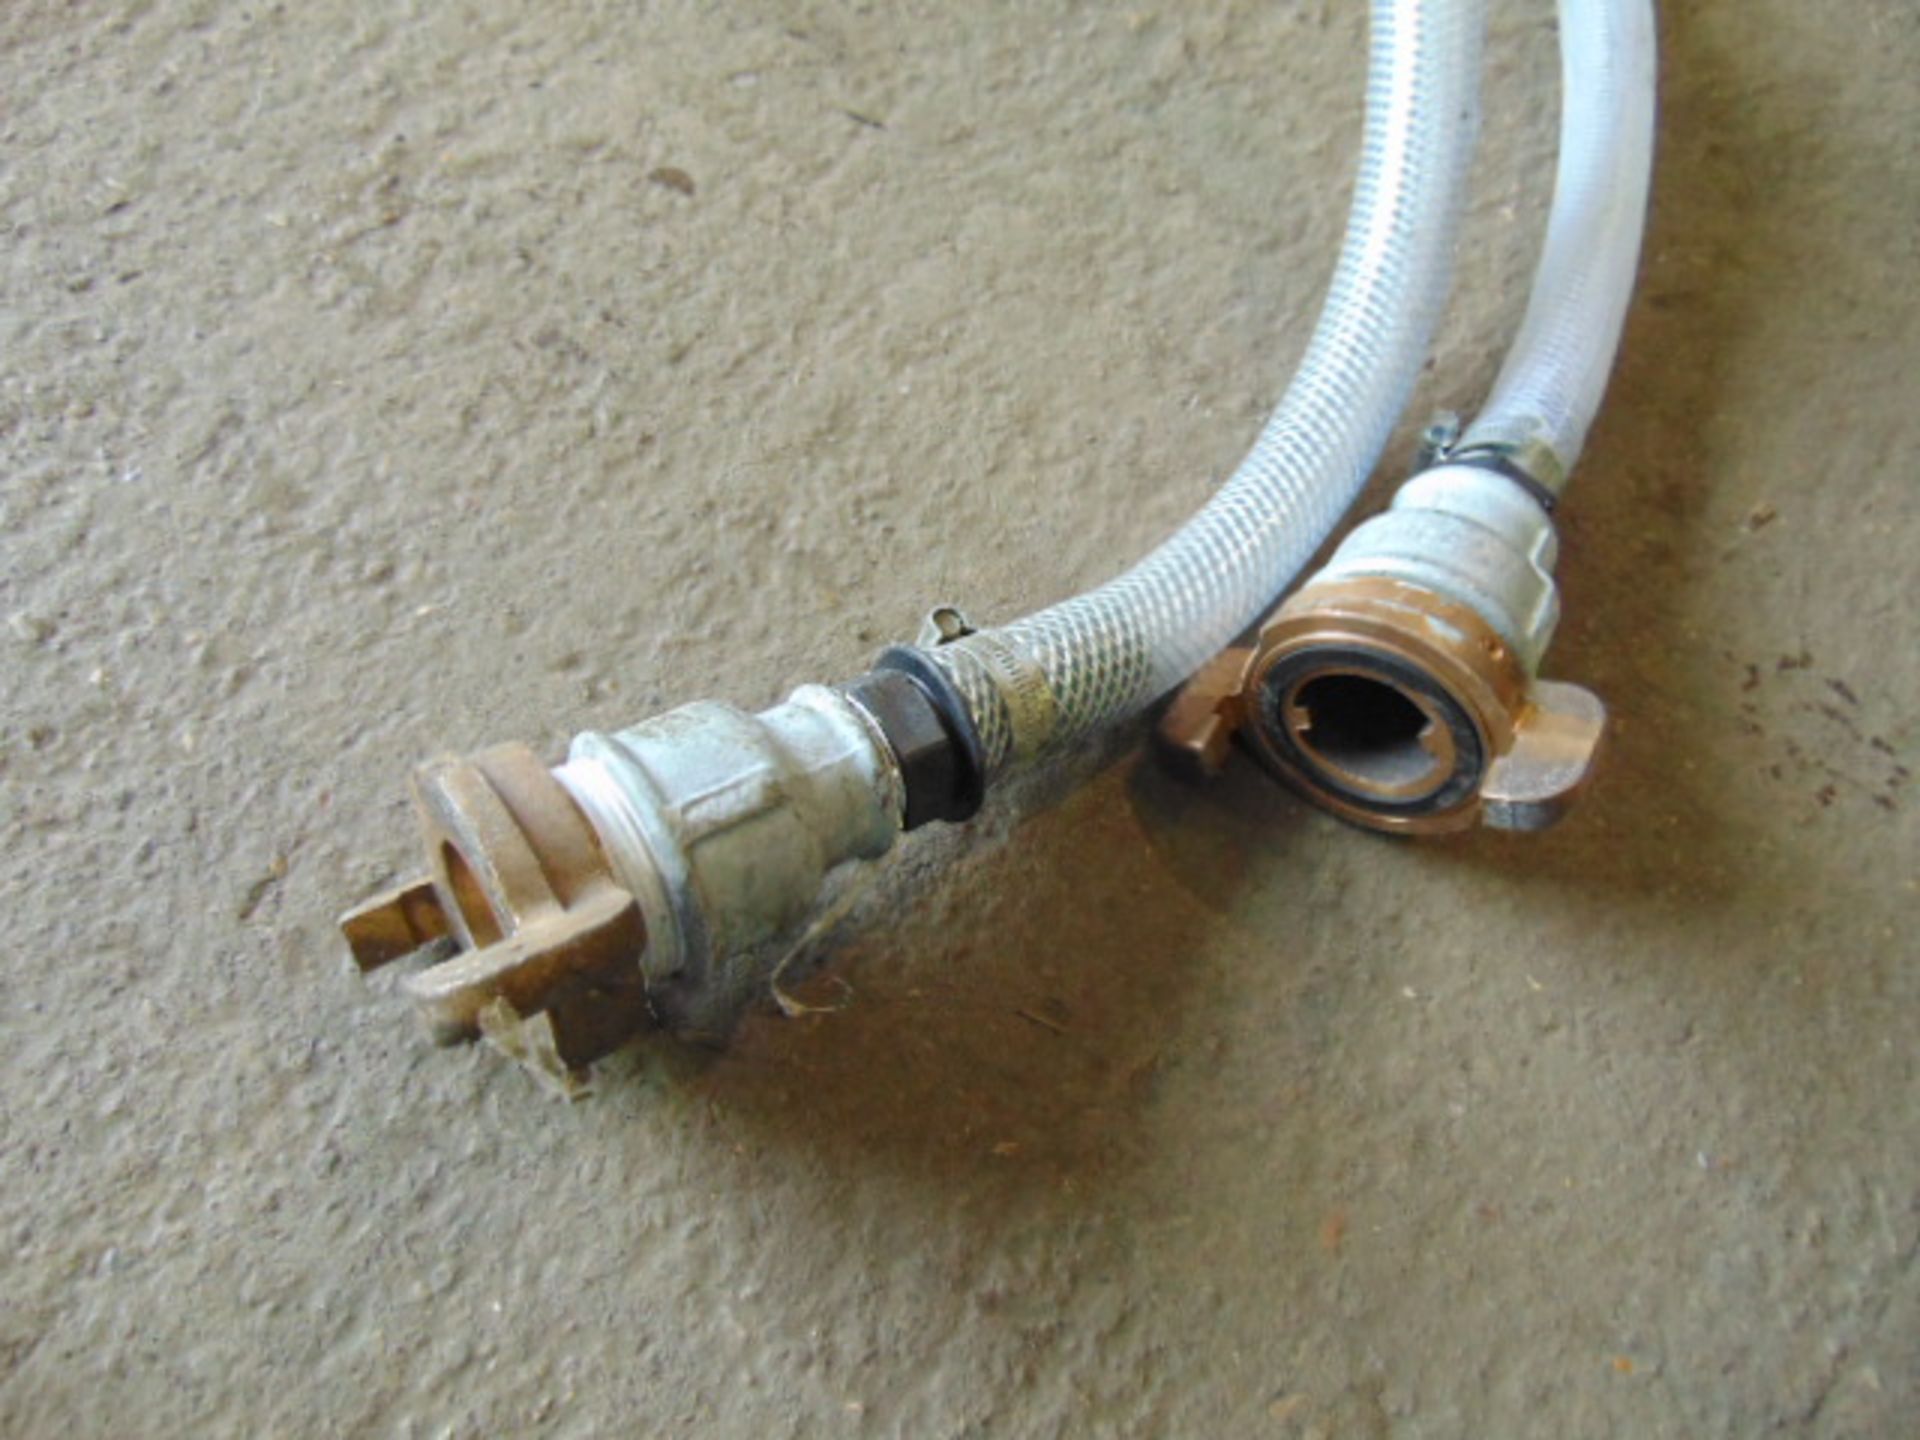 2 x Diesel Gravity Refuelling Hose Kit c/w Nozzle and Valve as Shown - Image 3 of 4